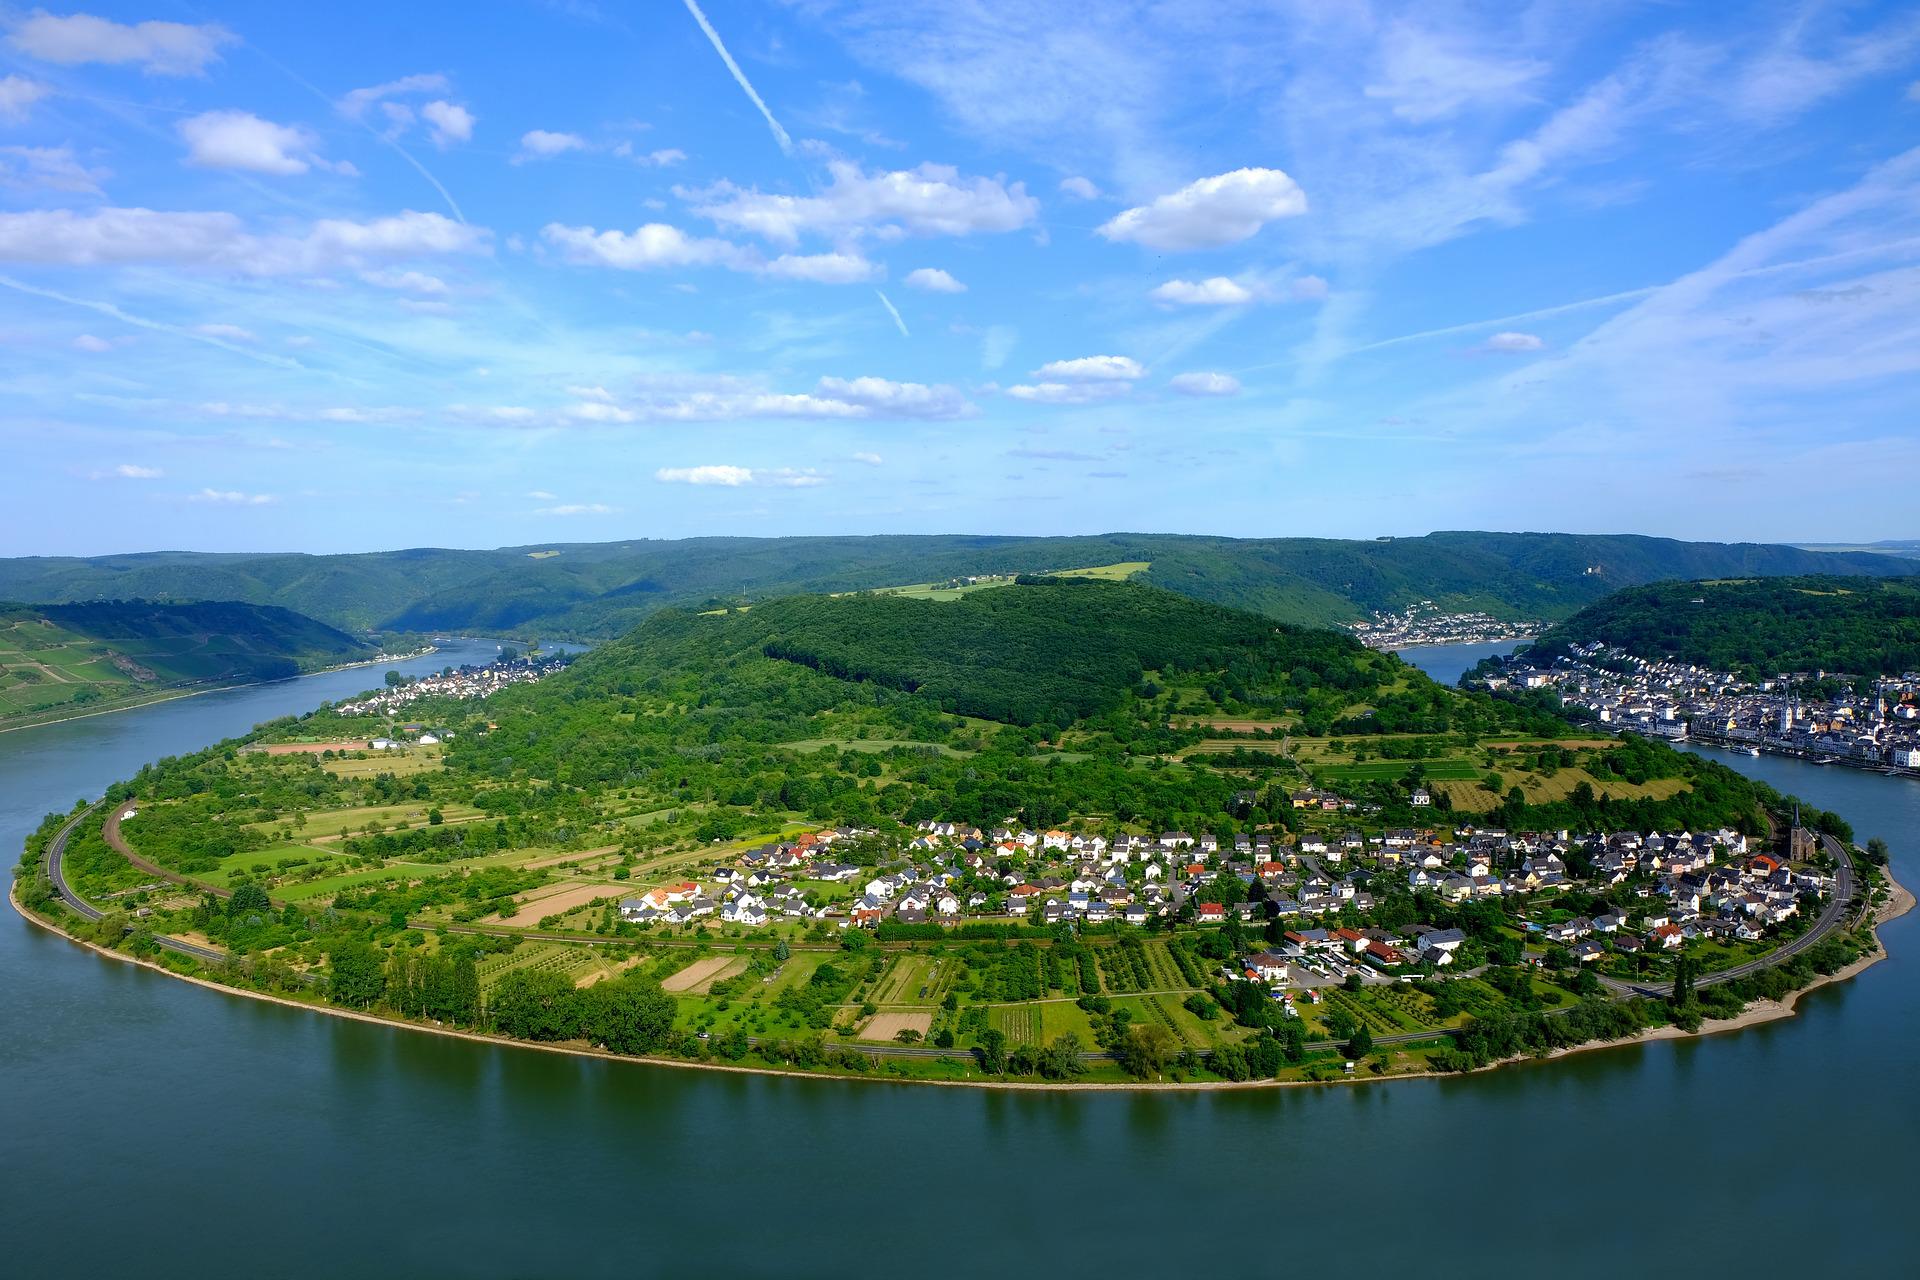 The infamous Rhine River and its tributaries.